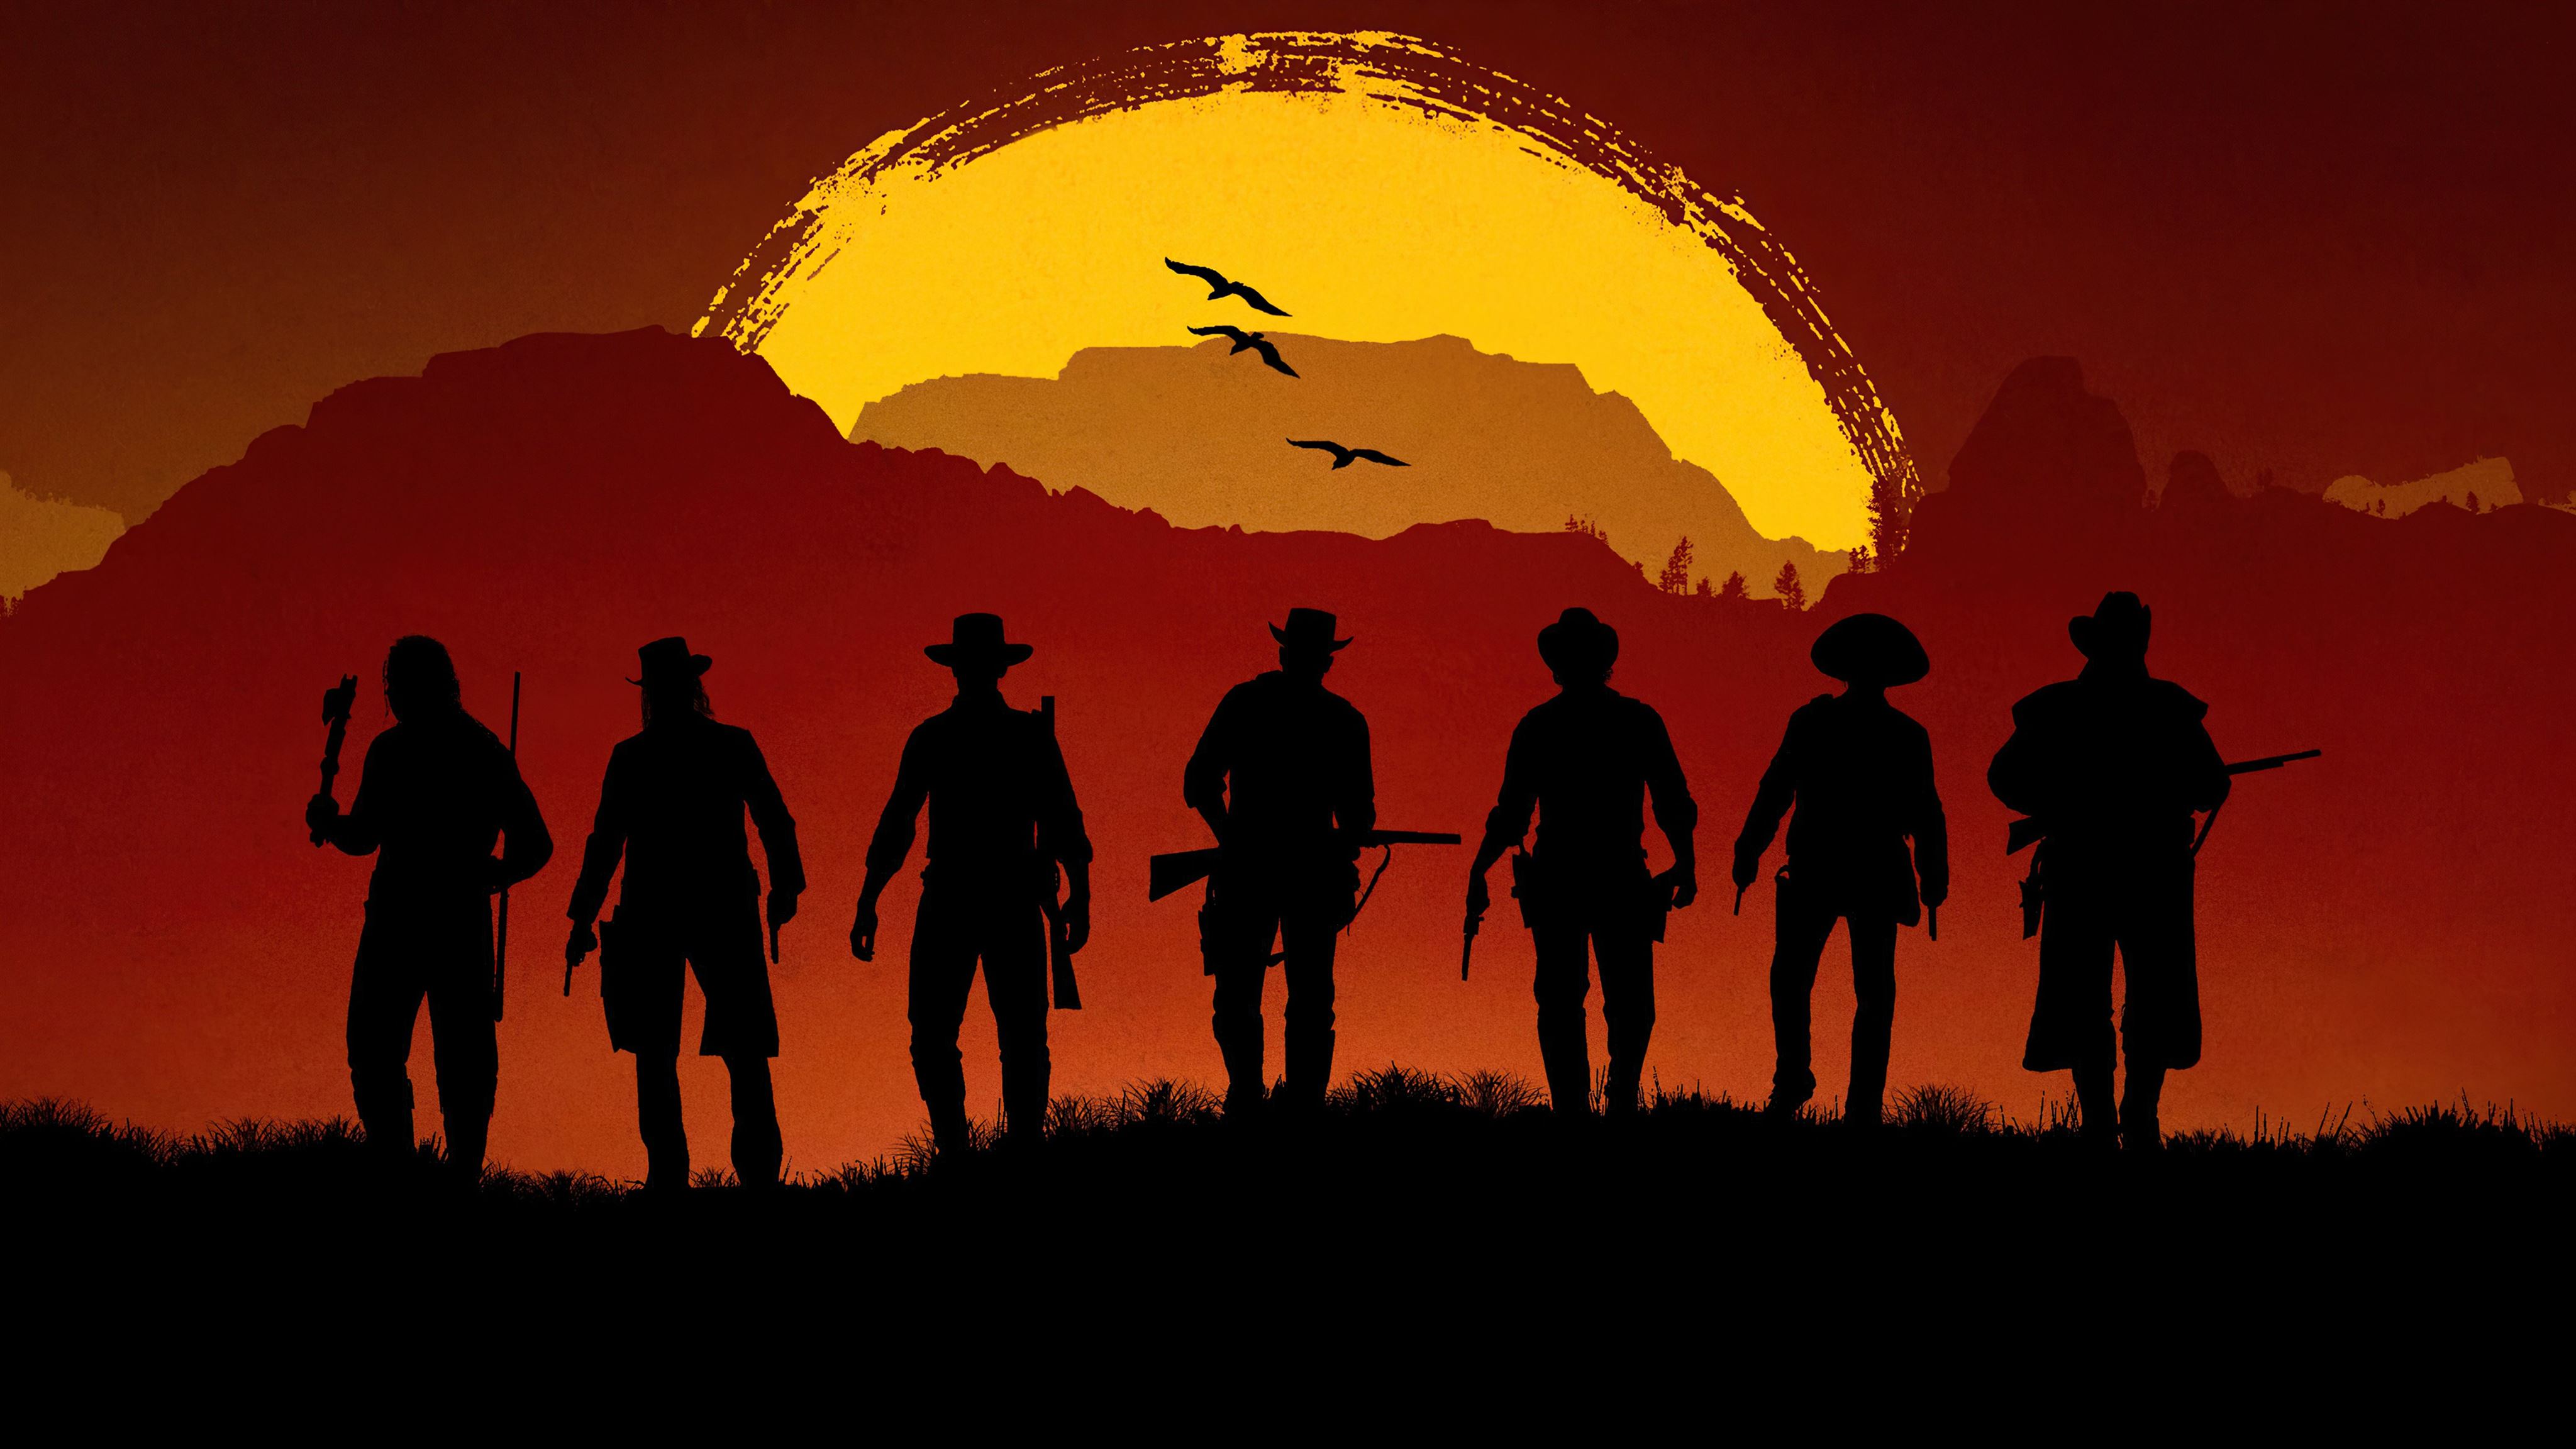 Wallpaper red dead redemption 2, silhouette, video game, 2019 desktop  wallpaper, hd image, picture, background, f4947b | wallpapersmug